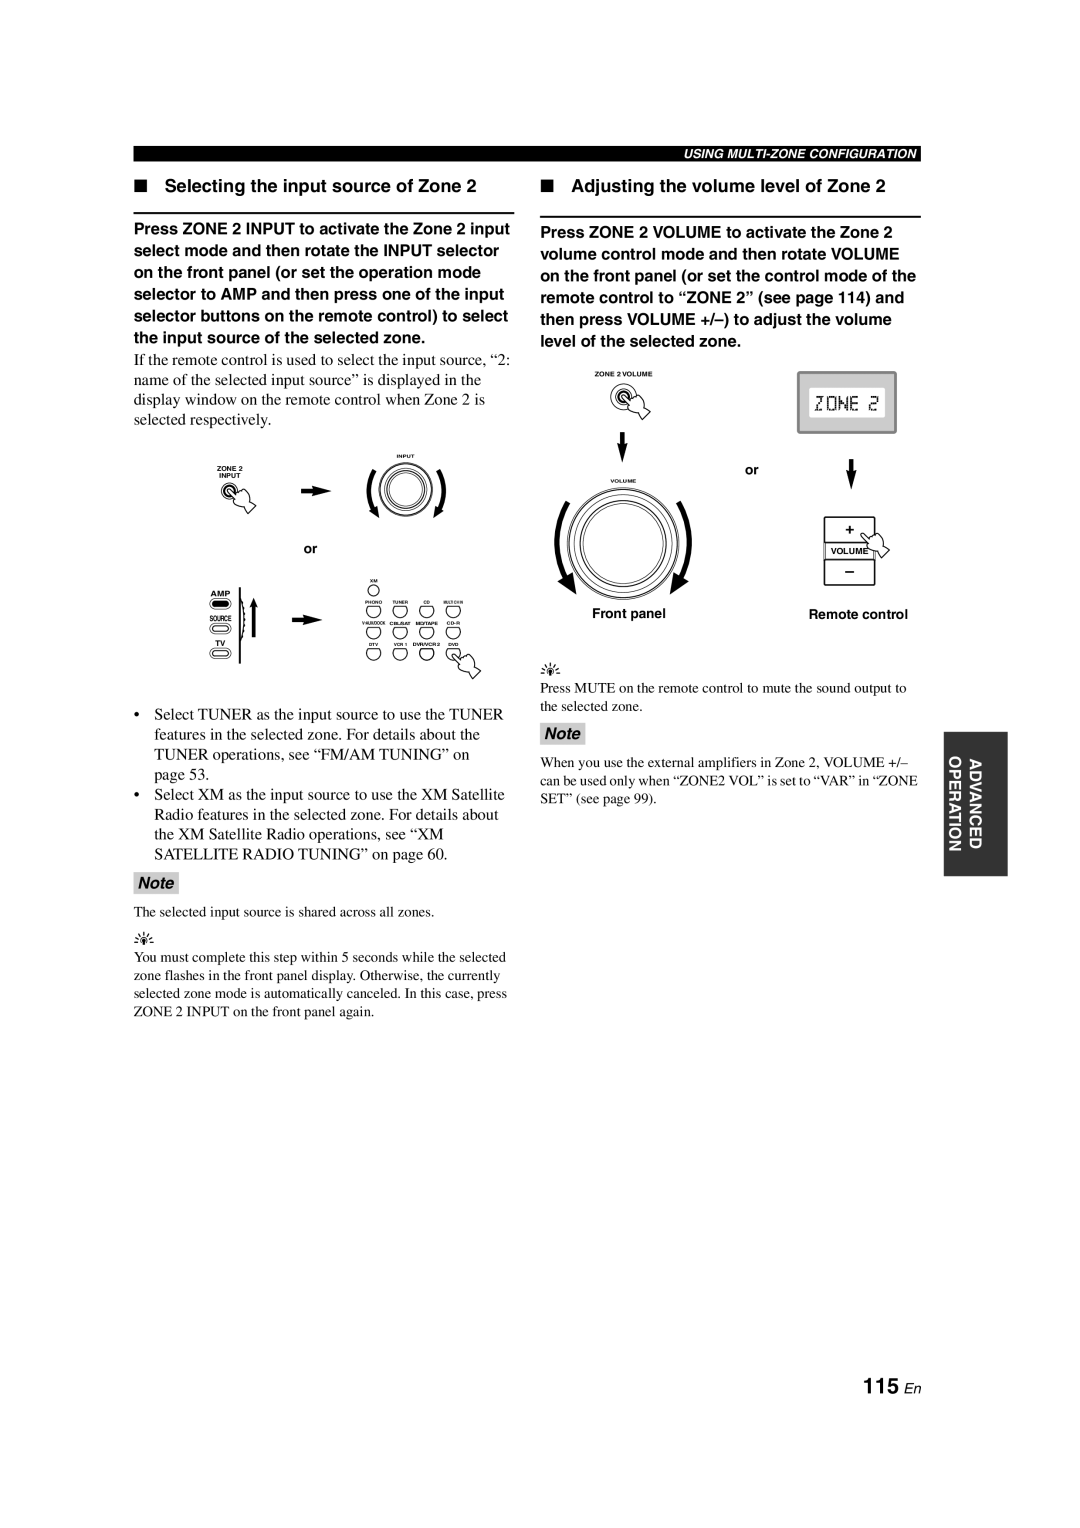 Yamaha HTR-6090 owner manual 115 En, Selecting the input source of Zone, Adjusting the volume level of Zone 